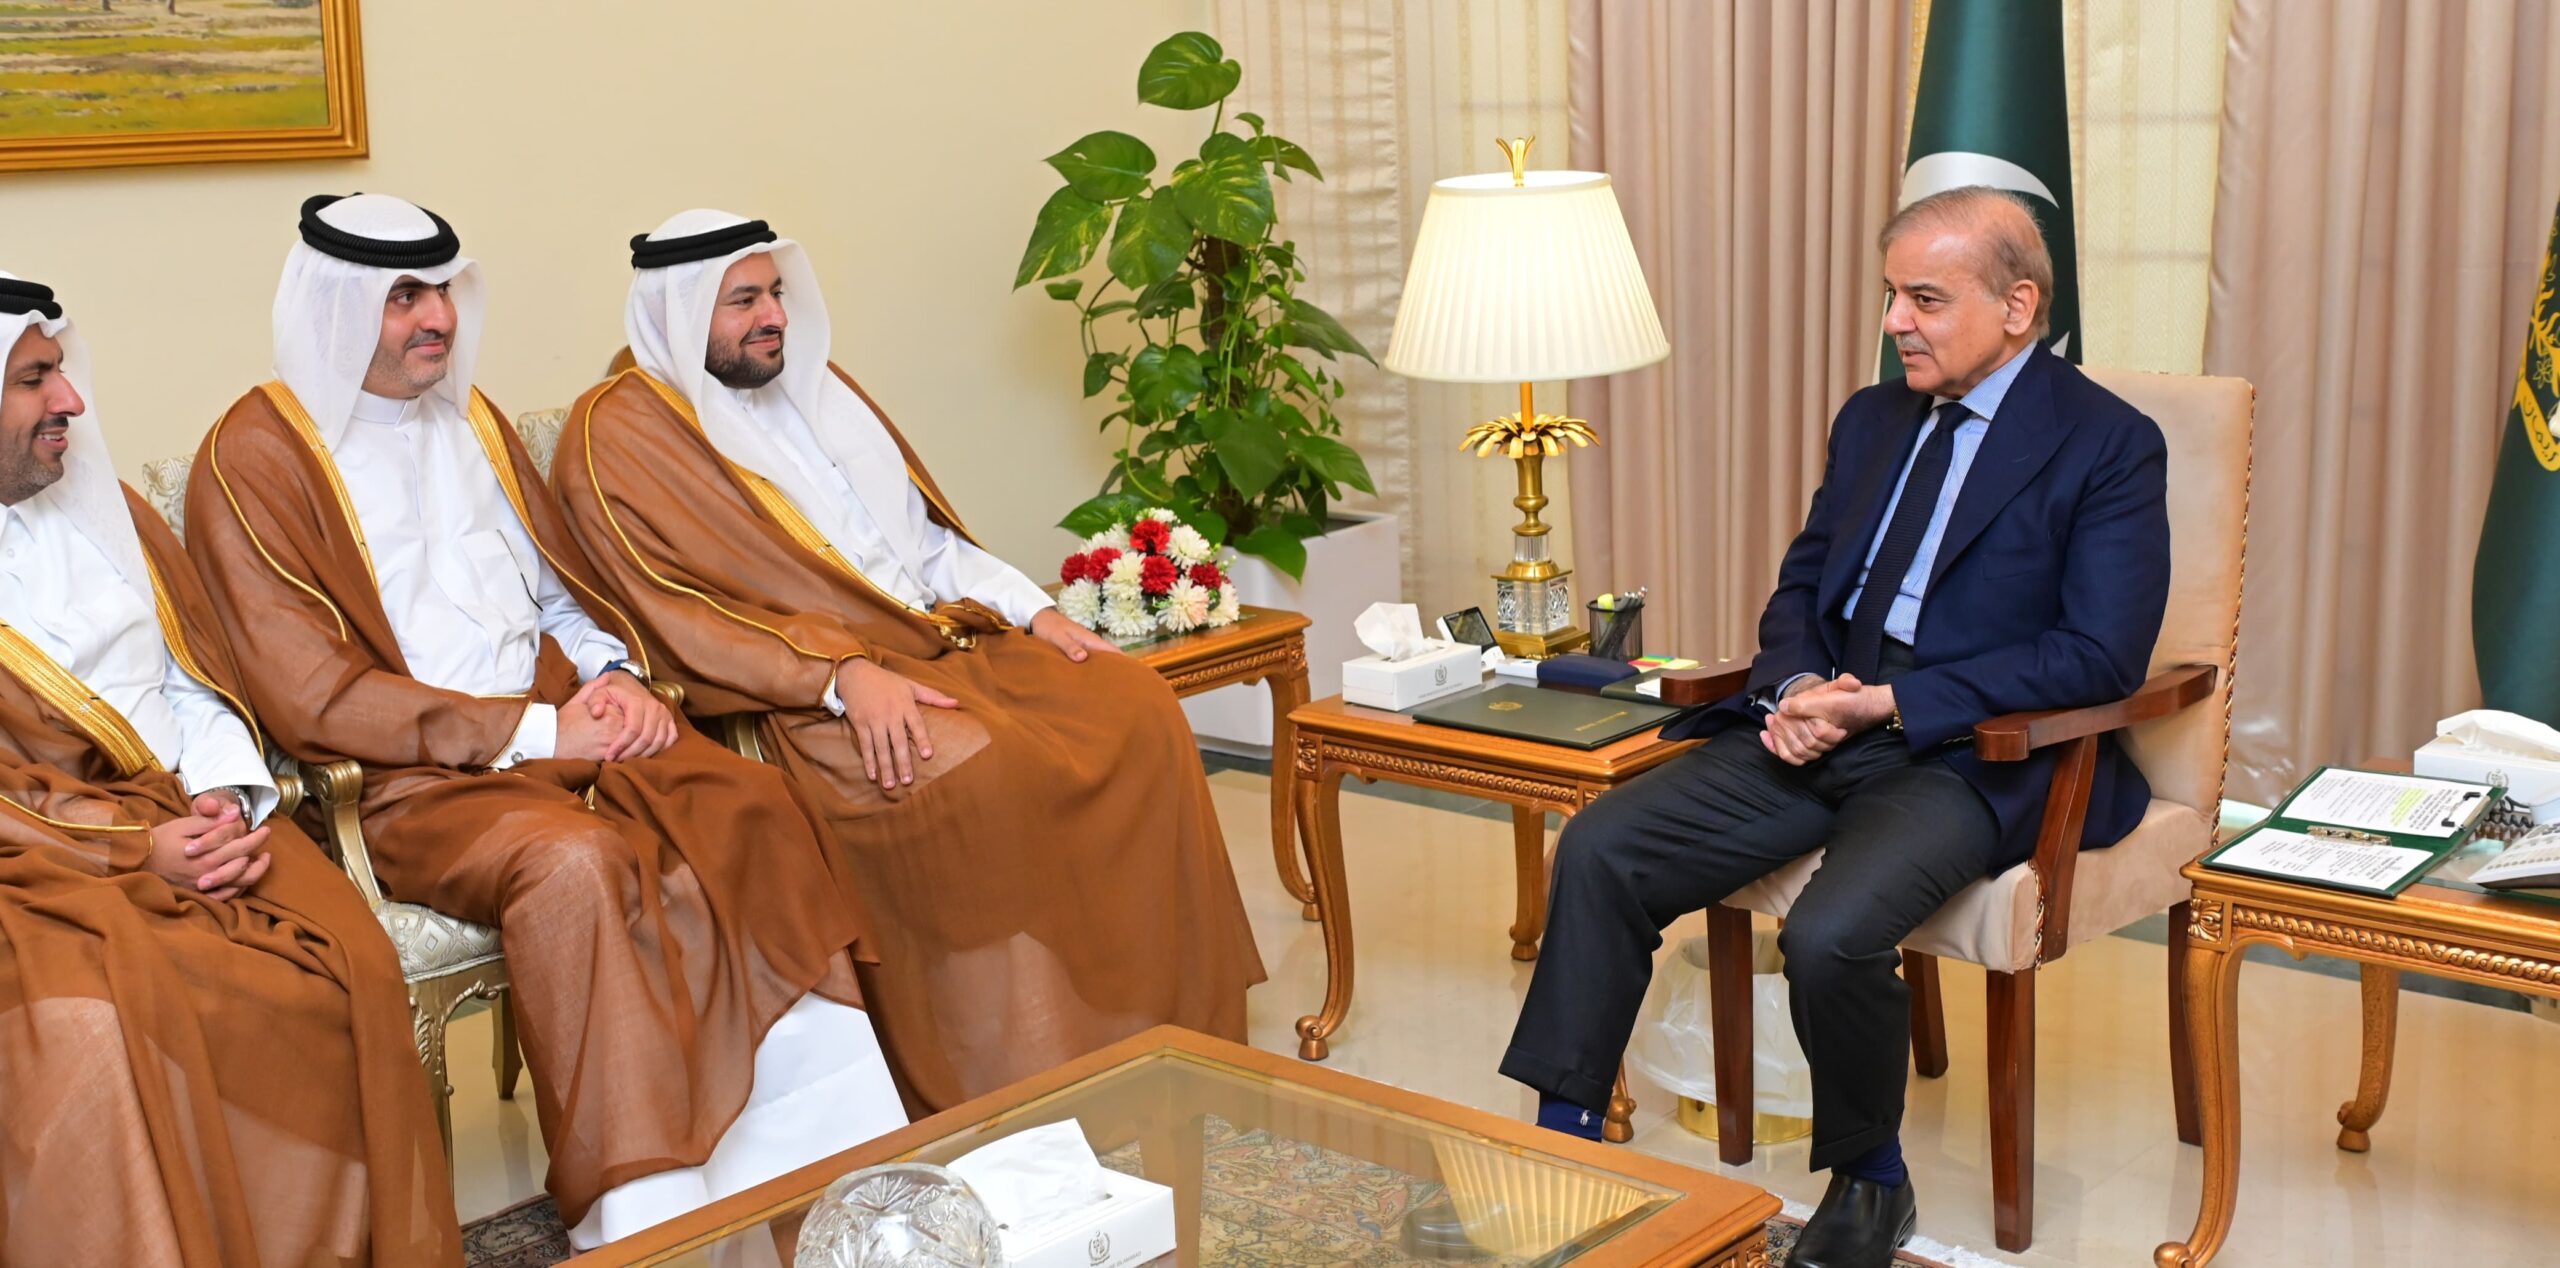 MINISTER OF STATE FOR FOREIGN AFFAIRS OF QATAR CALLS ON THE PRIME MINISTER